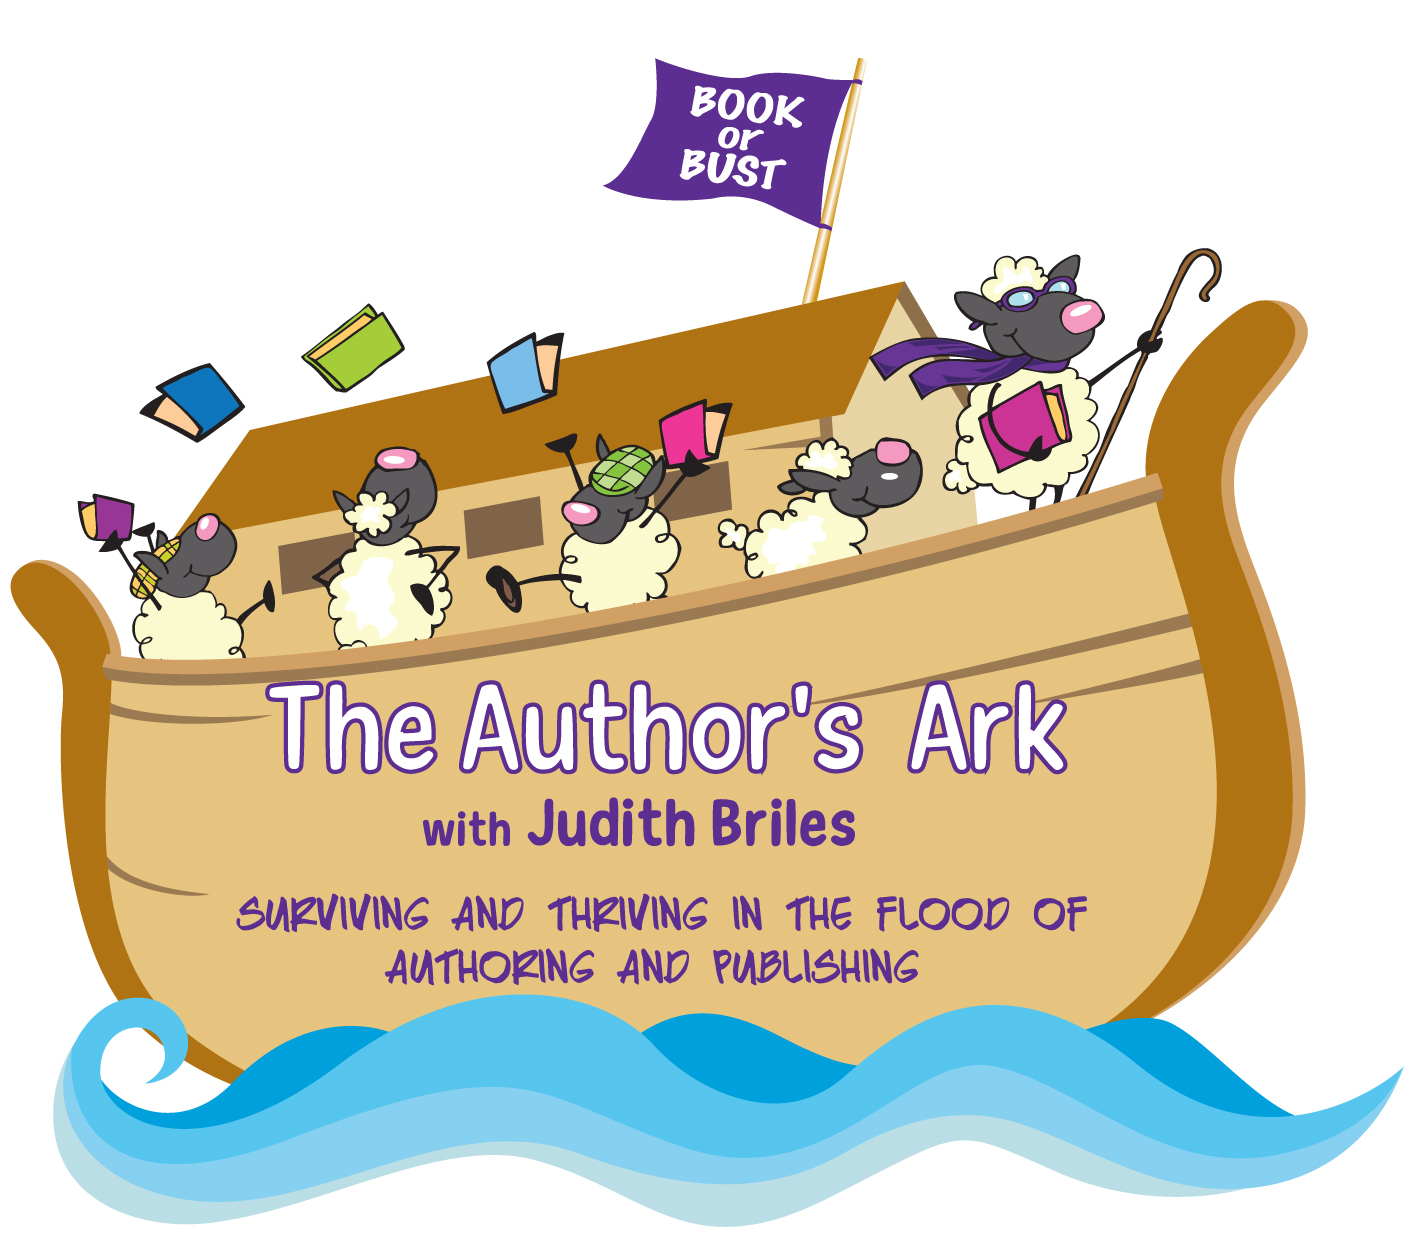 The Author’s Ark … Surviving and Thriving in the Flood of Authoring and Publishing  Coaching Groups  Launches in March